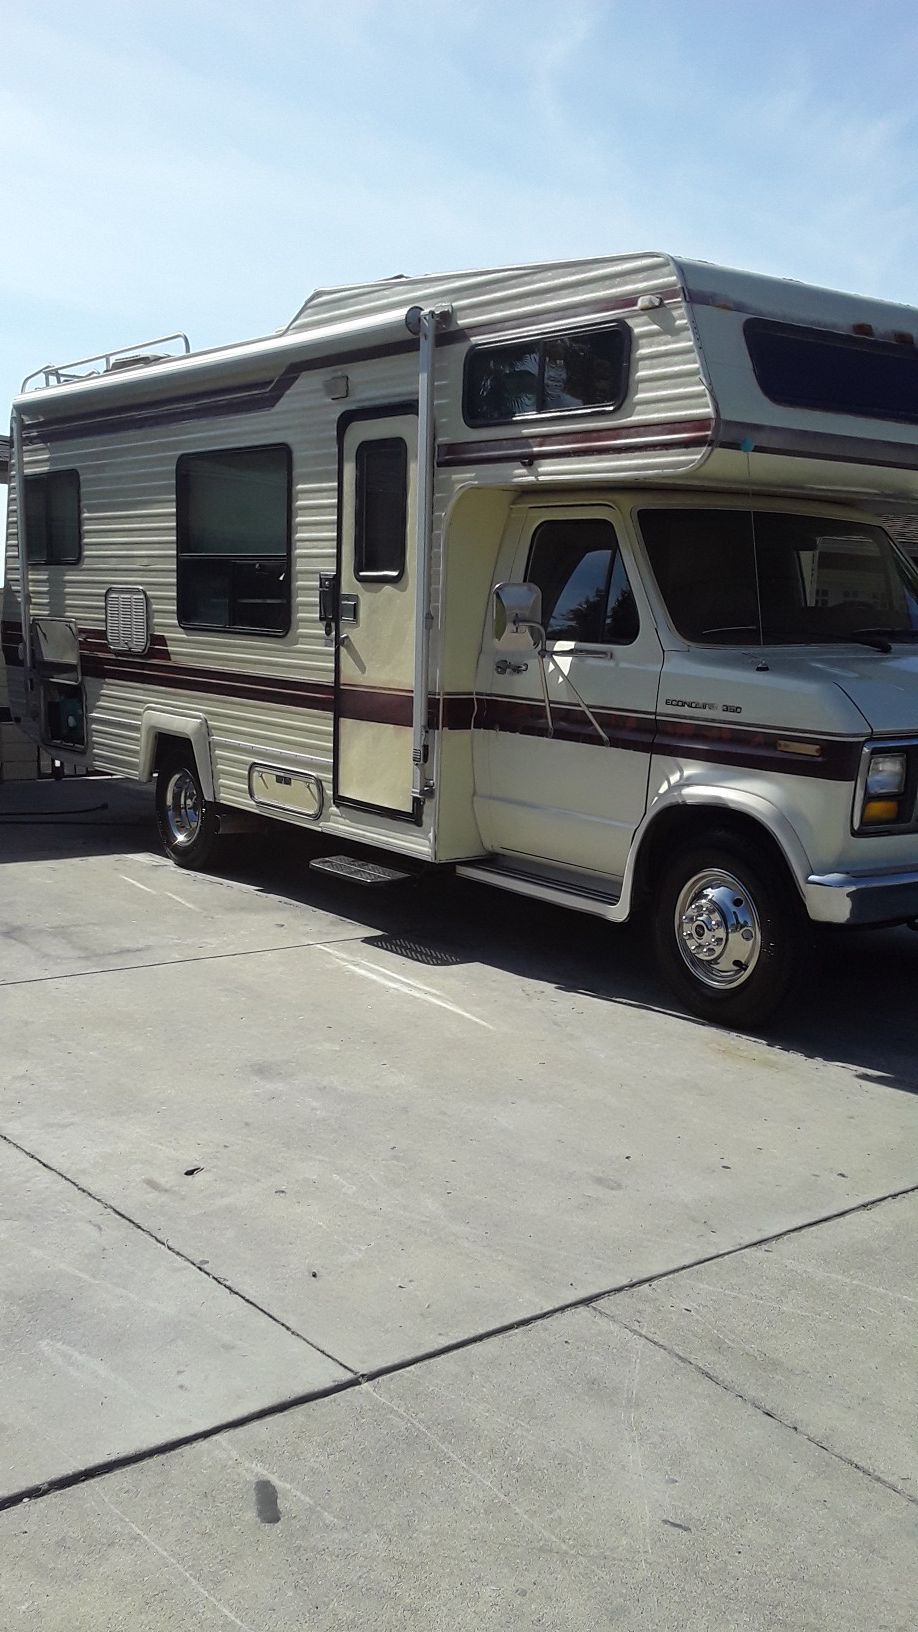 Selling my one owner 1991 Econo 24 foot Class C RV with low mileage